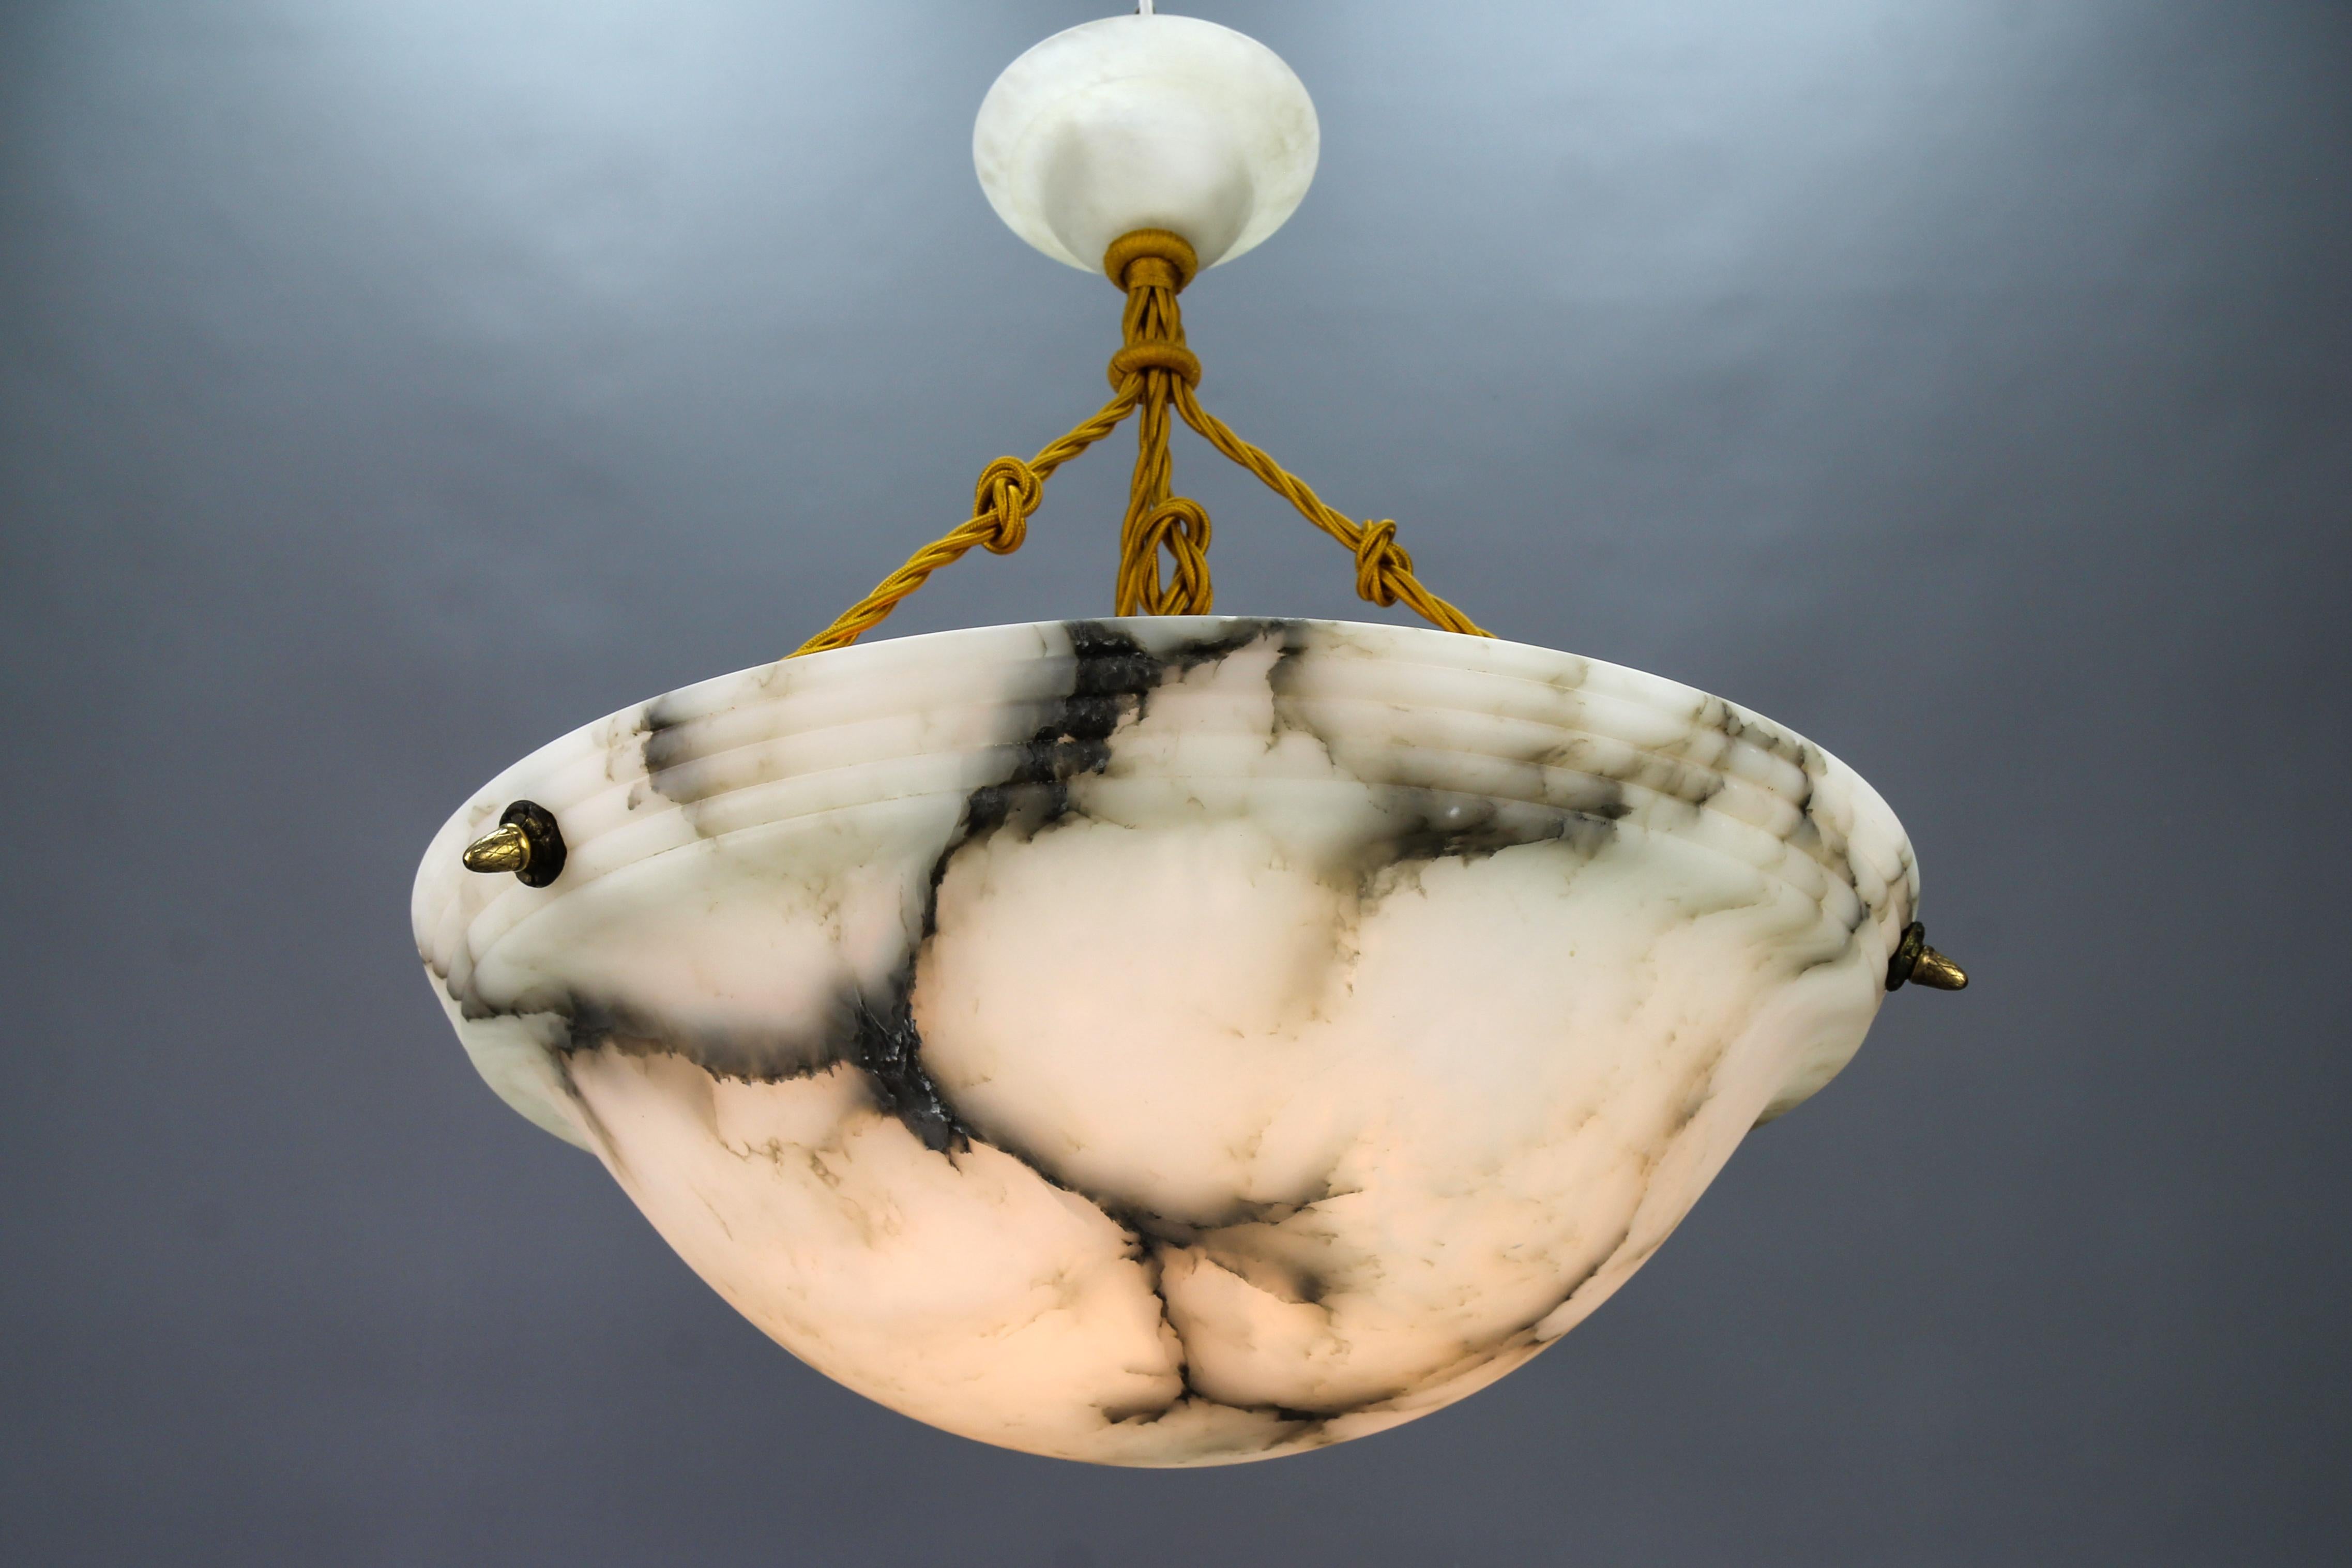 Large French Art Deco white and black alabaster pendant light fixture.
Gorgeous and large French alabaster pendant ceiling light fixture from the 1920s. Beautifully veined and masterfully carved one-piece white alabaster bowl suspended by three